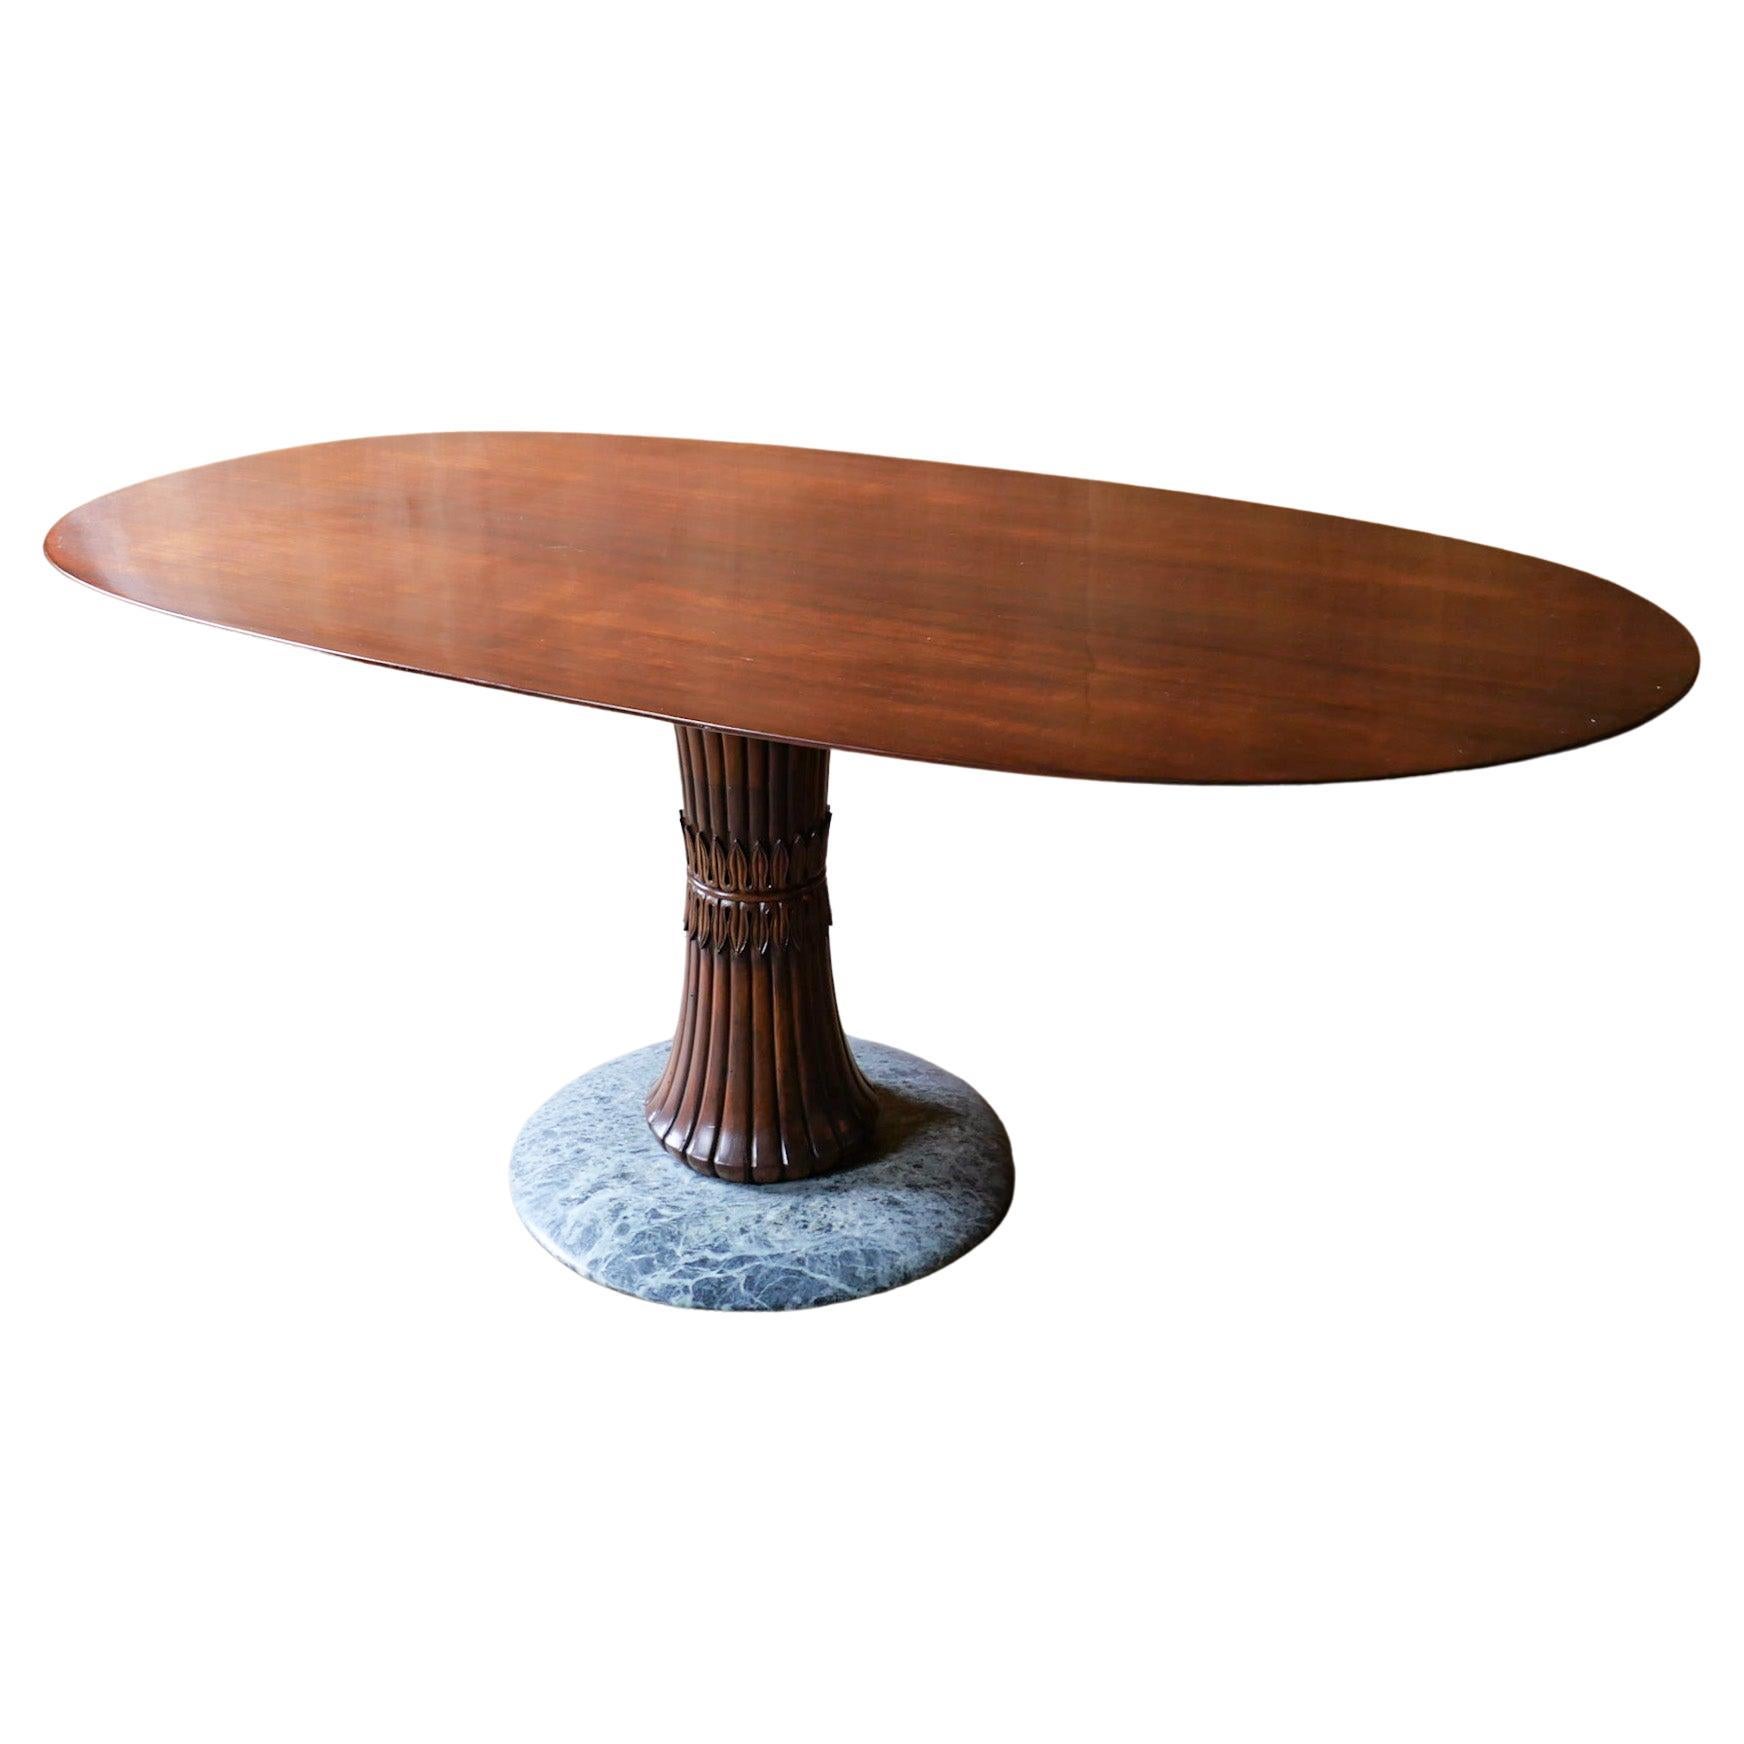  Mid-Century Modern Wooden Marble Dining Table attr. to O. Borsani, Italy 1950s